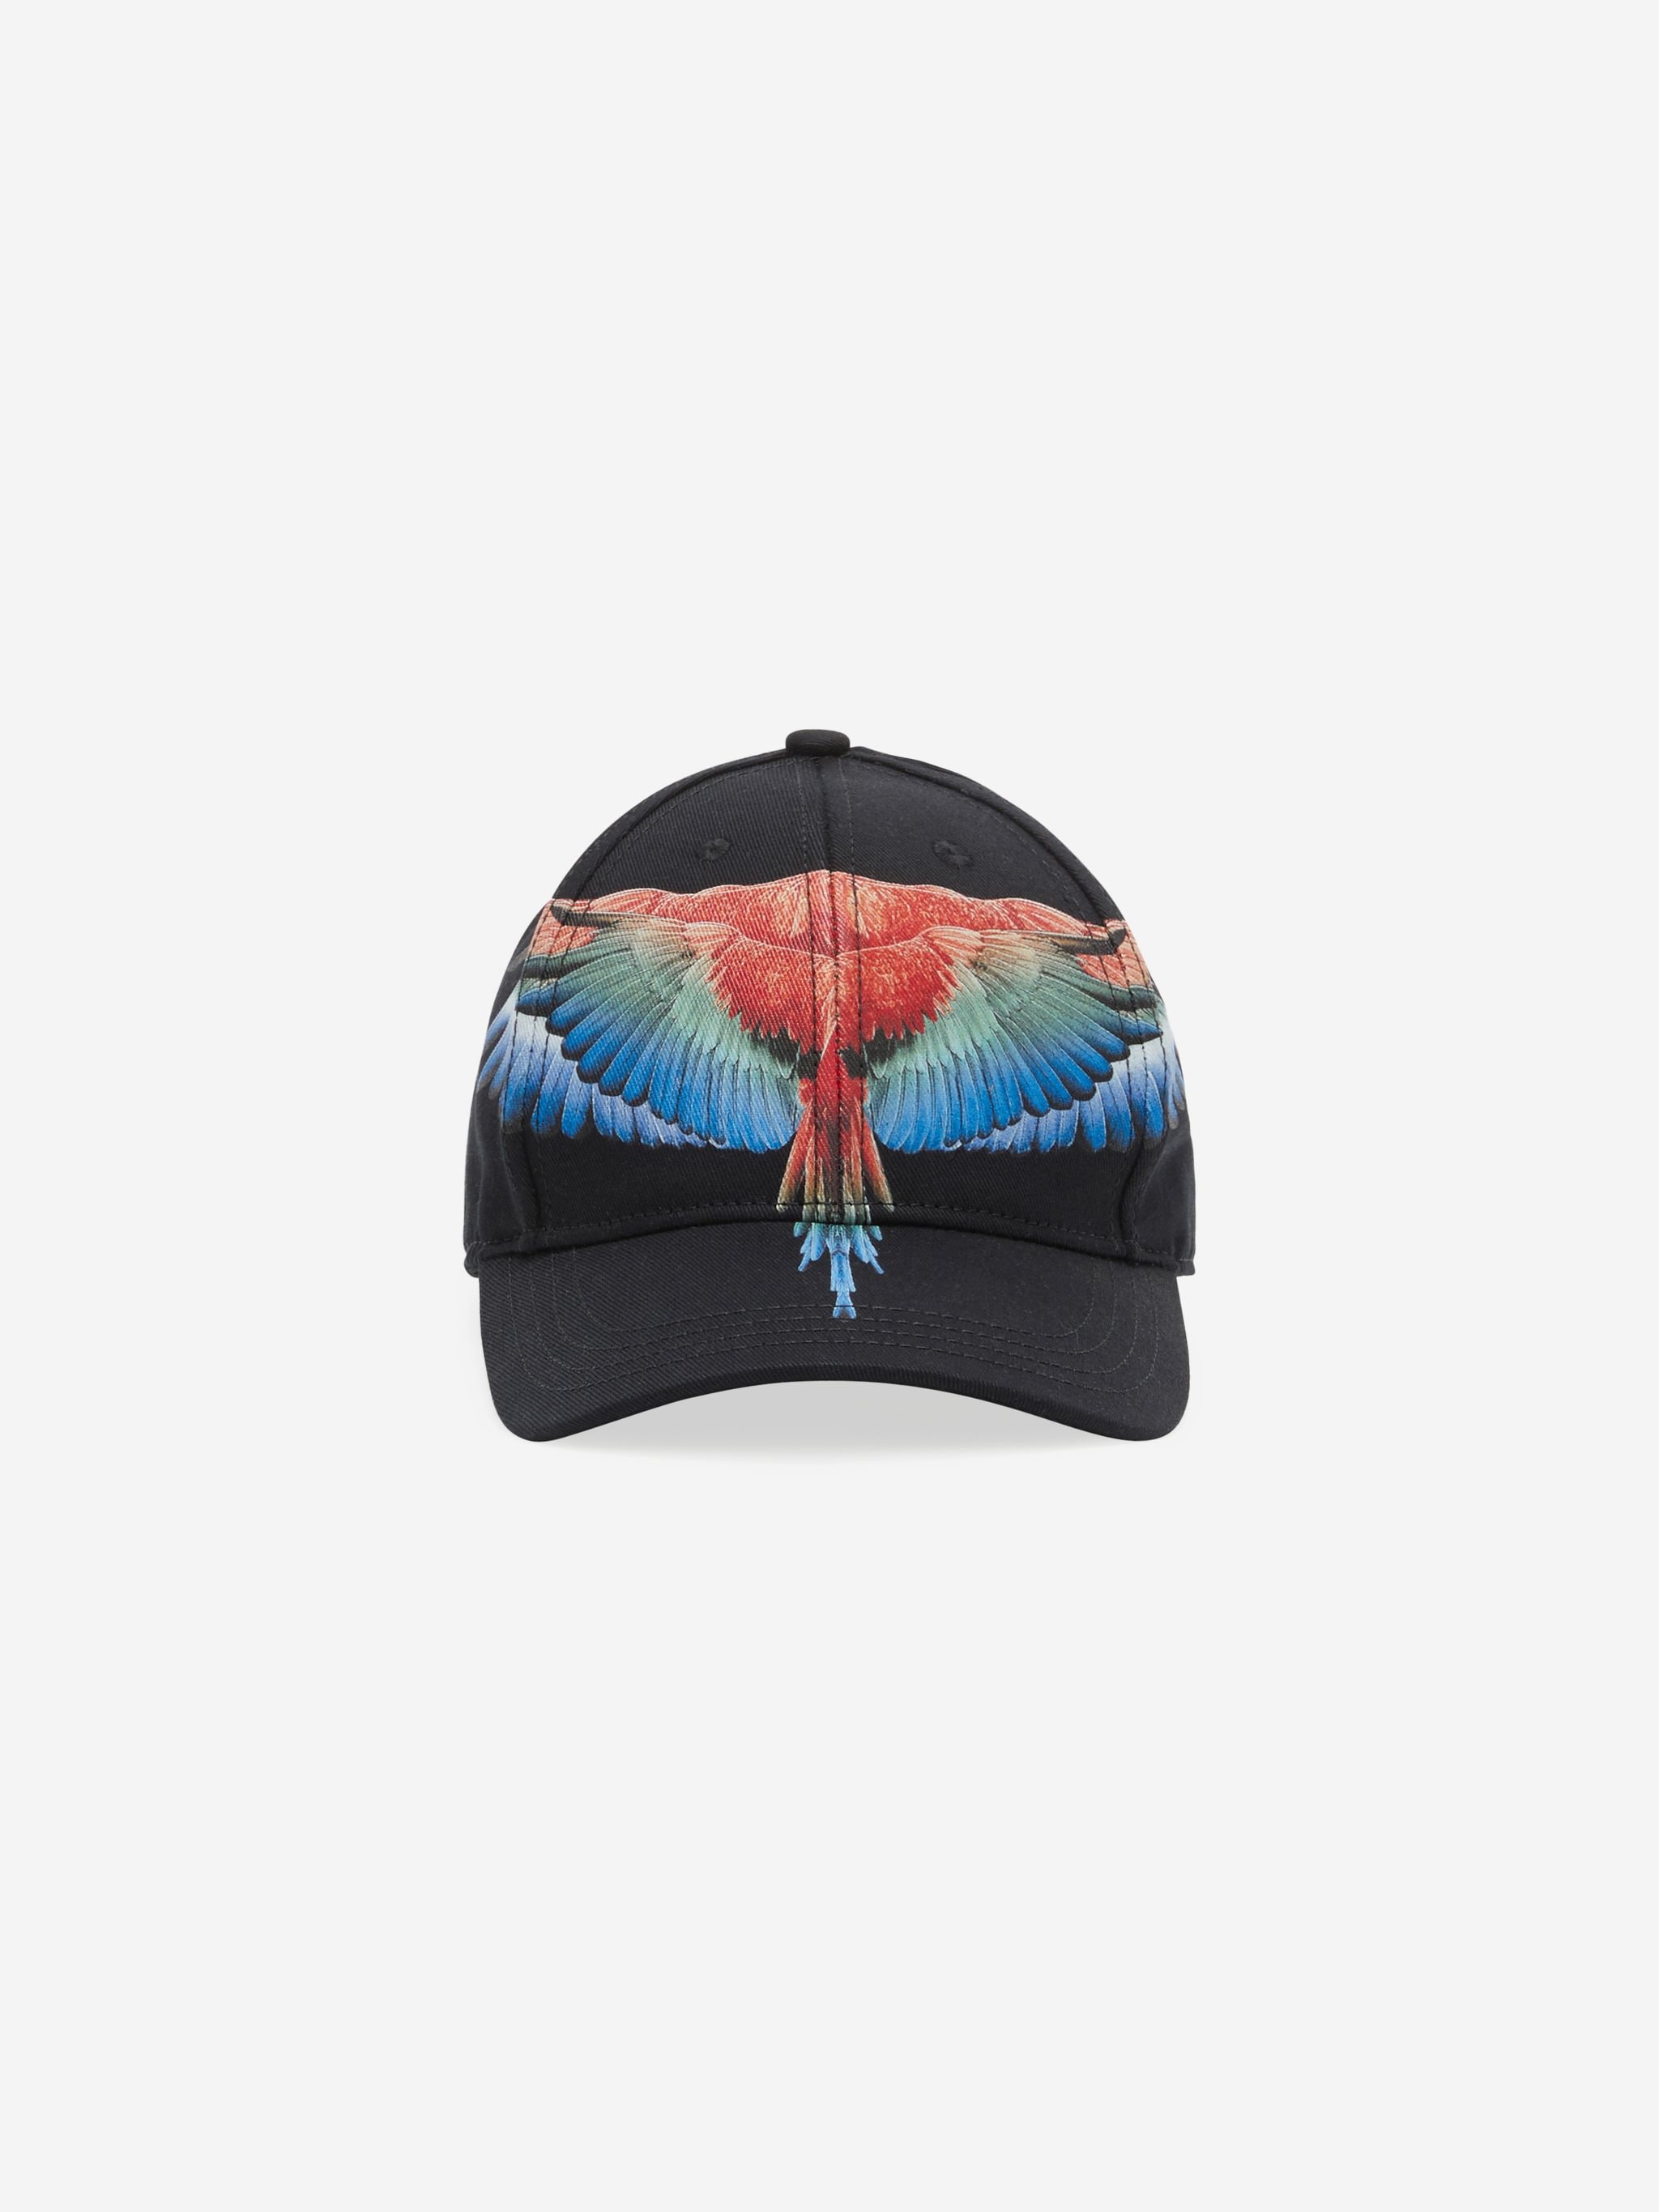 Wings baseball cap from Marcelo Burlon Kids featuring black/multicolour, cotton, signature Marcelo Burlon Wings print, curved peak, tonal stitching, eyelet detailing and adjustable press-stud fastening to the rear.